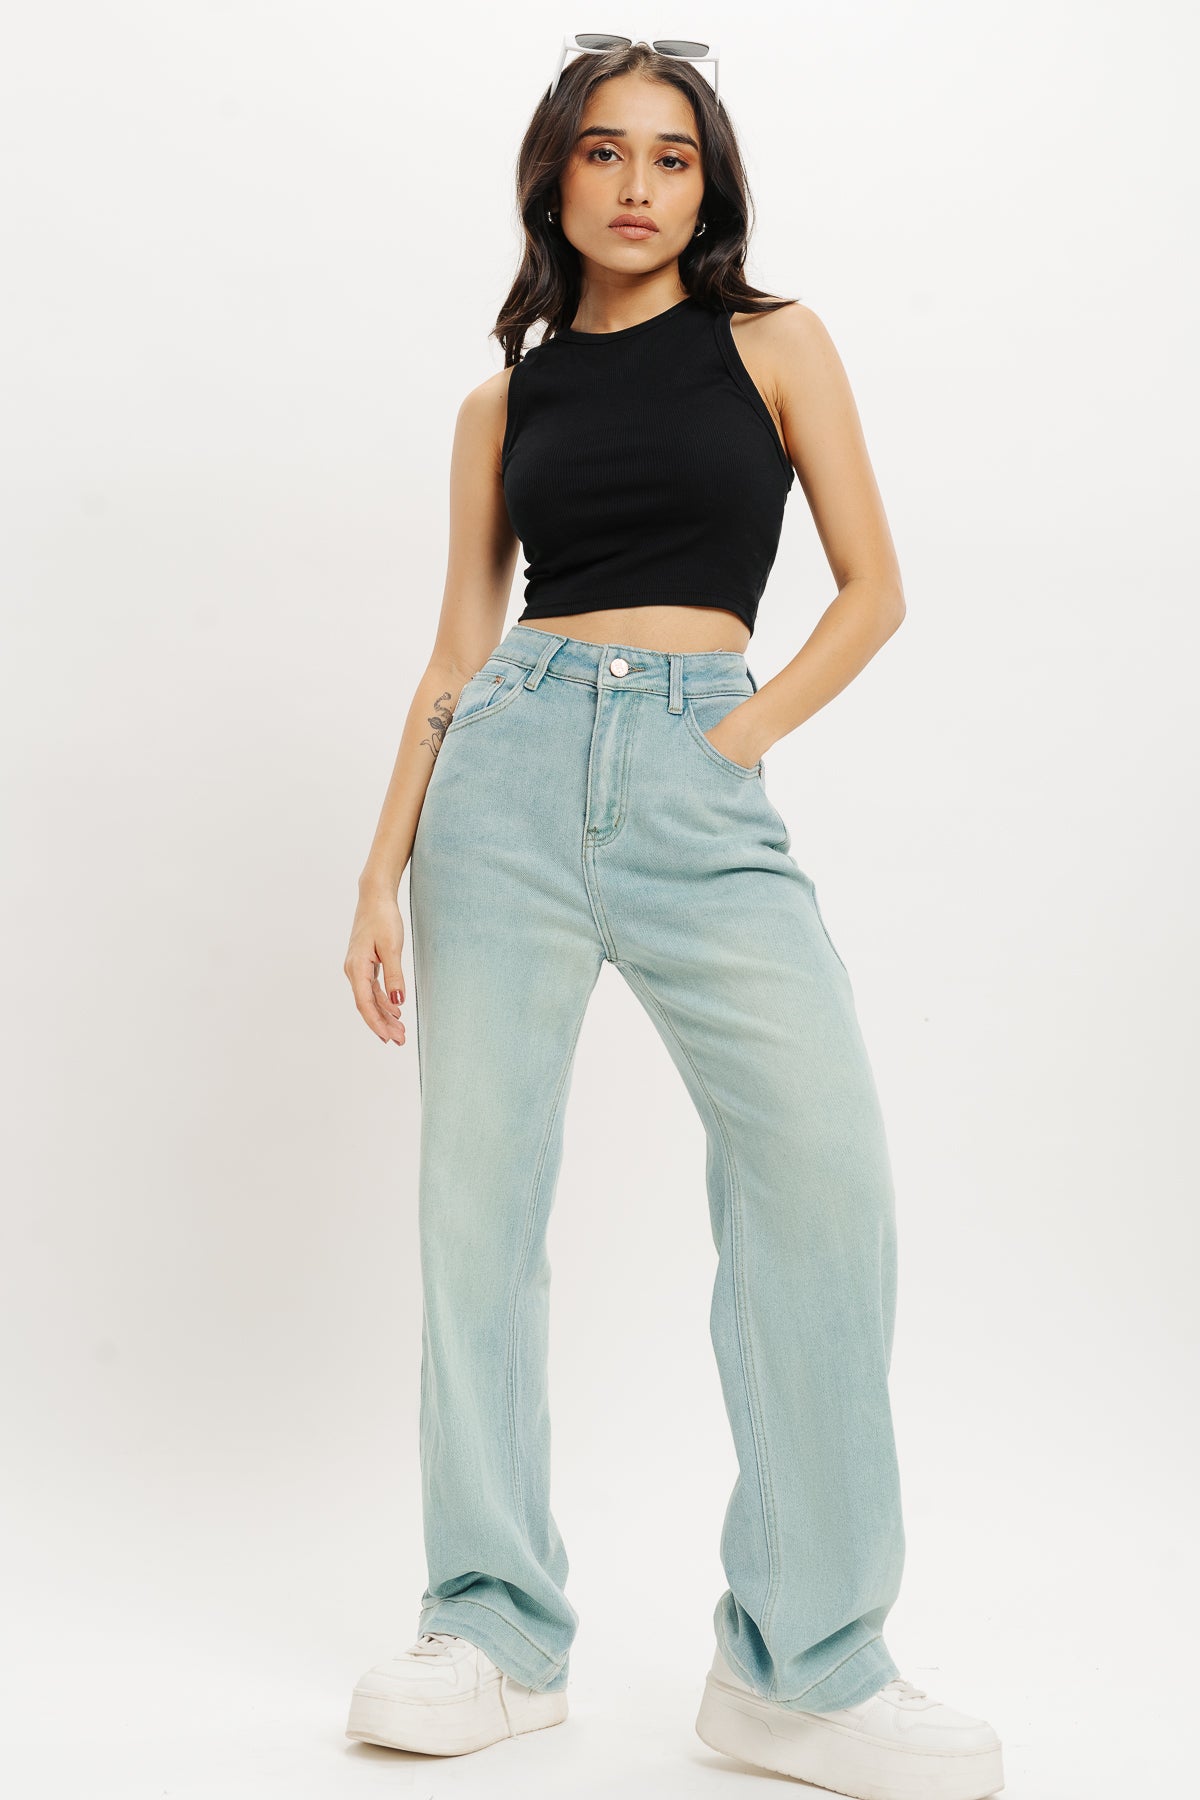 Shop Jeans For Women Online in India at Best Price – Page 7